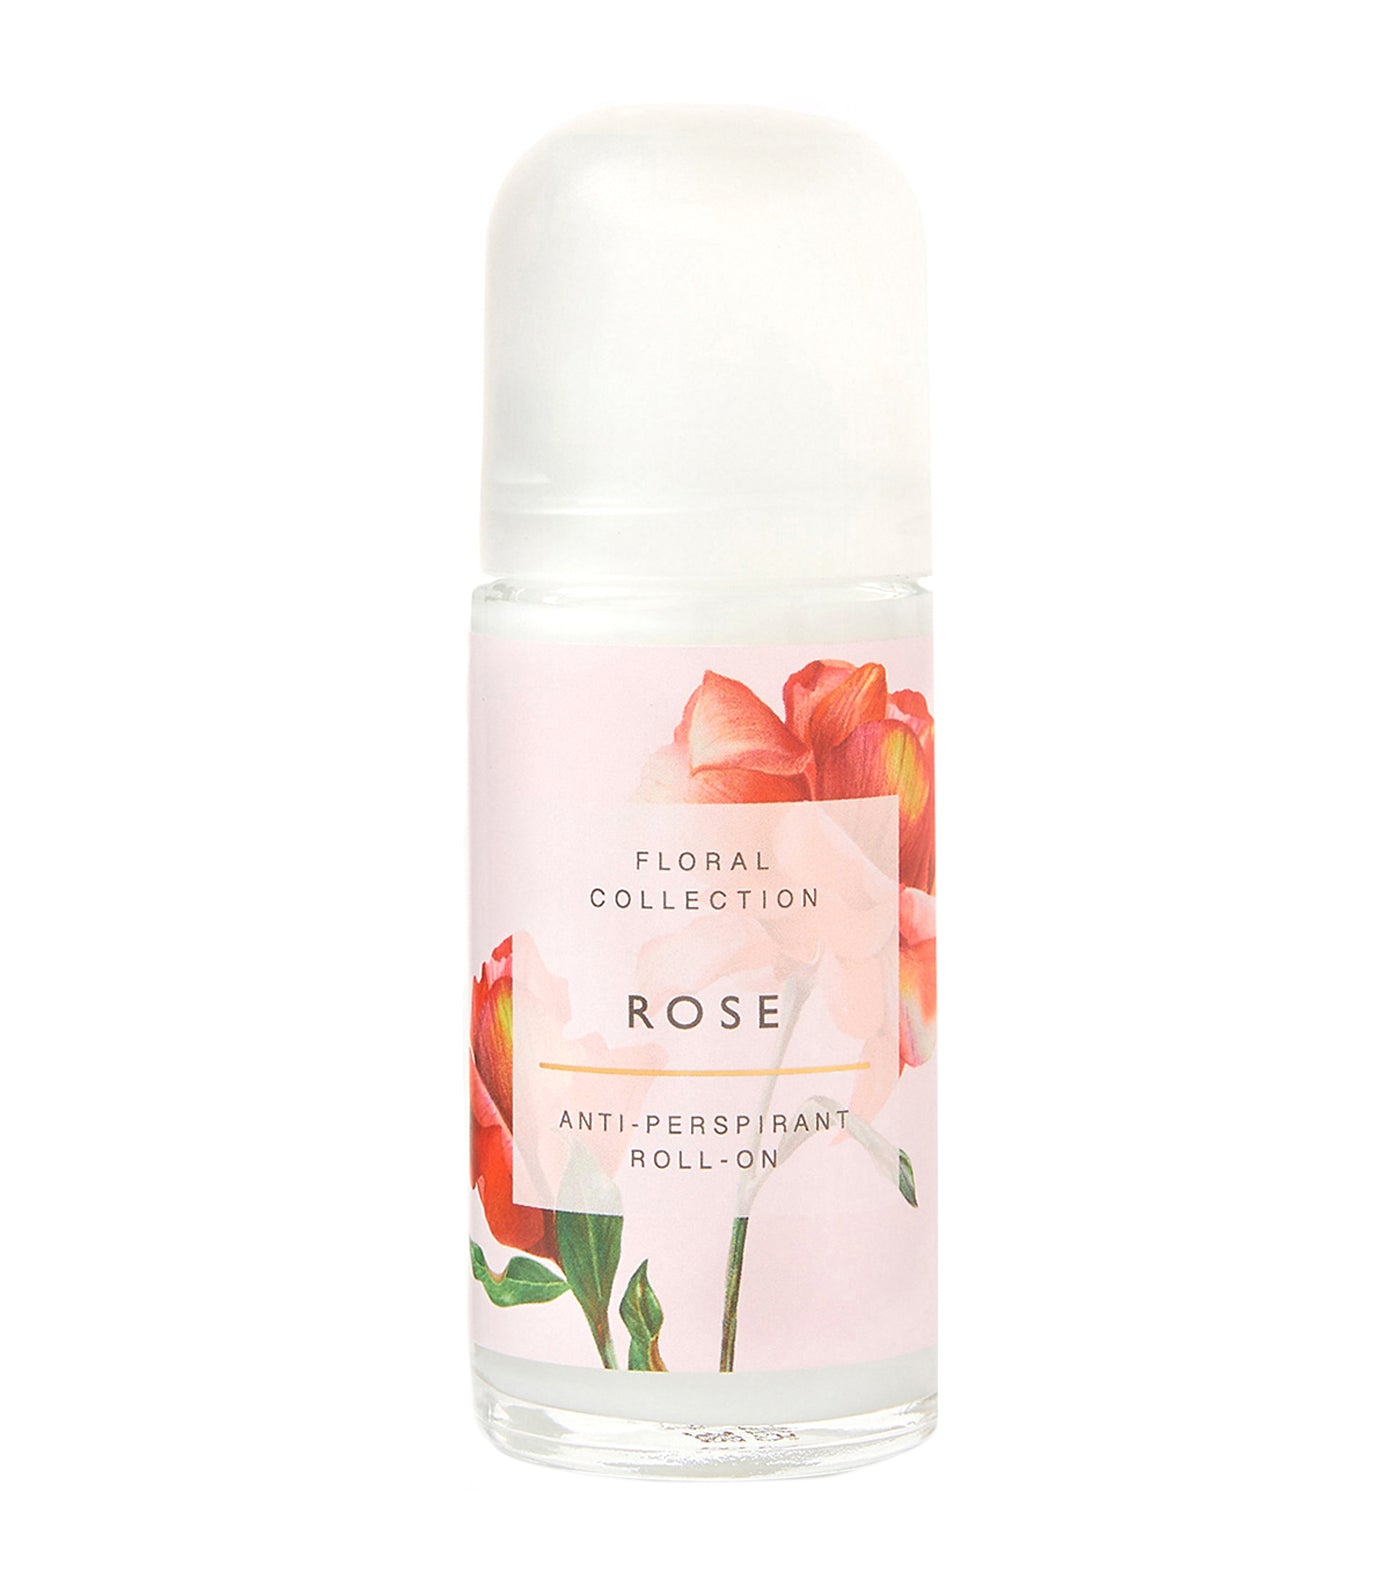 Marks & Spencer Floral Collection Rose Roll on Deodorant